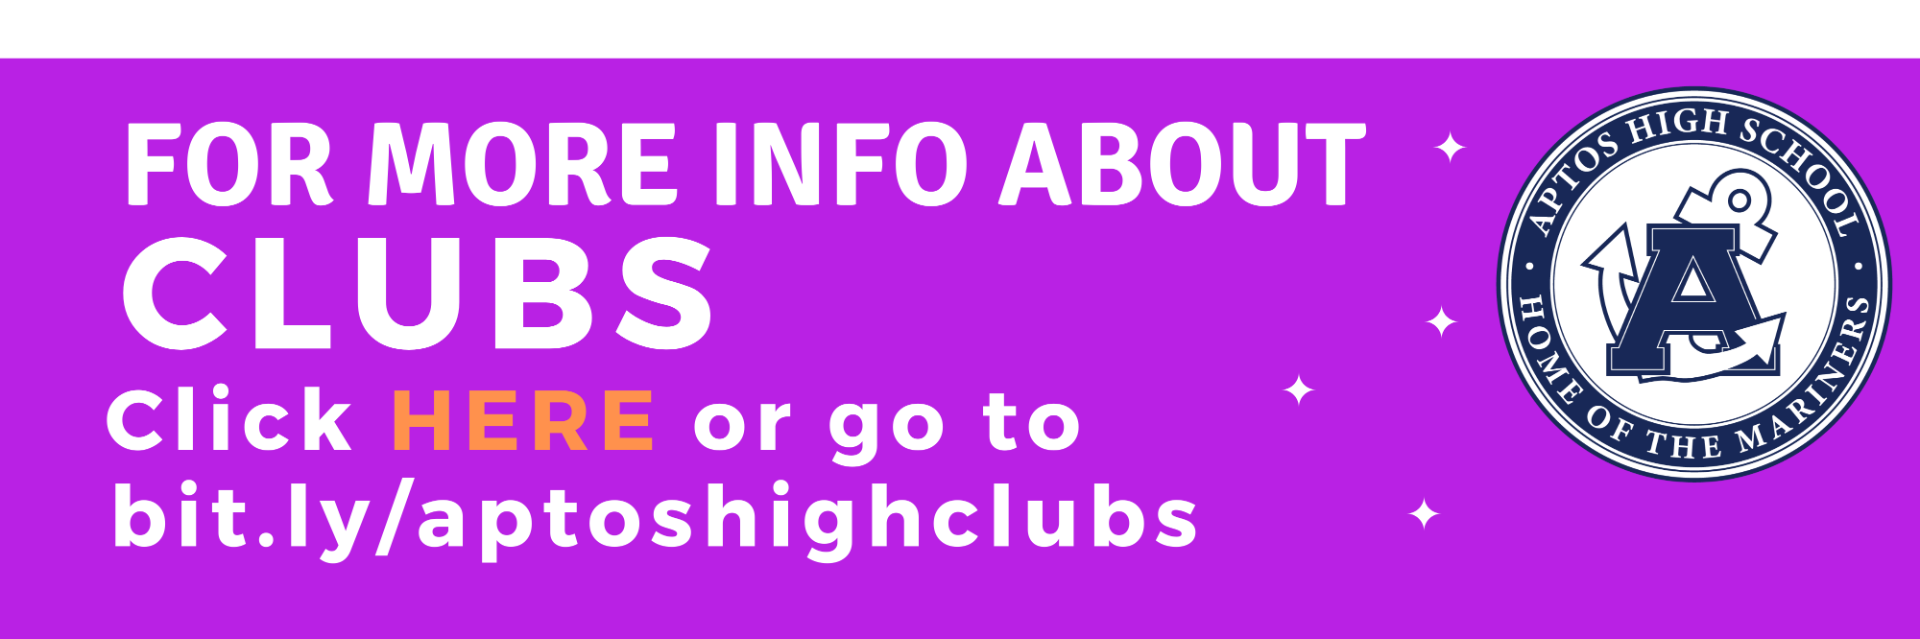 For more information about clubs, go to www.bit.ly/aptoshighclubs